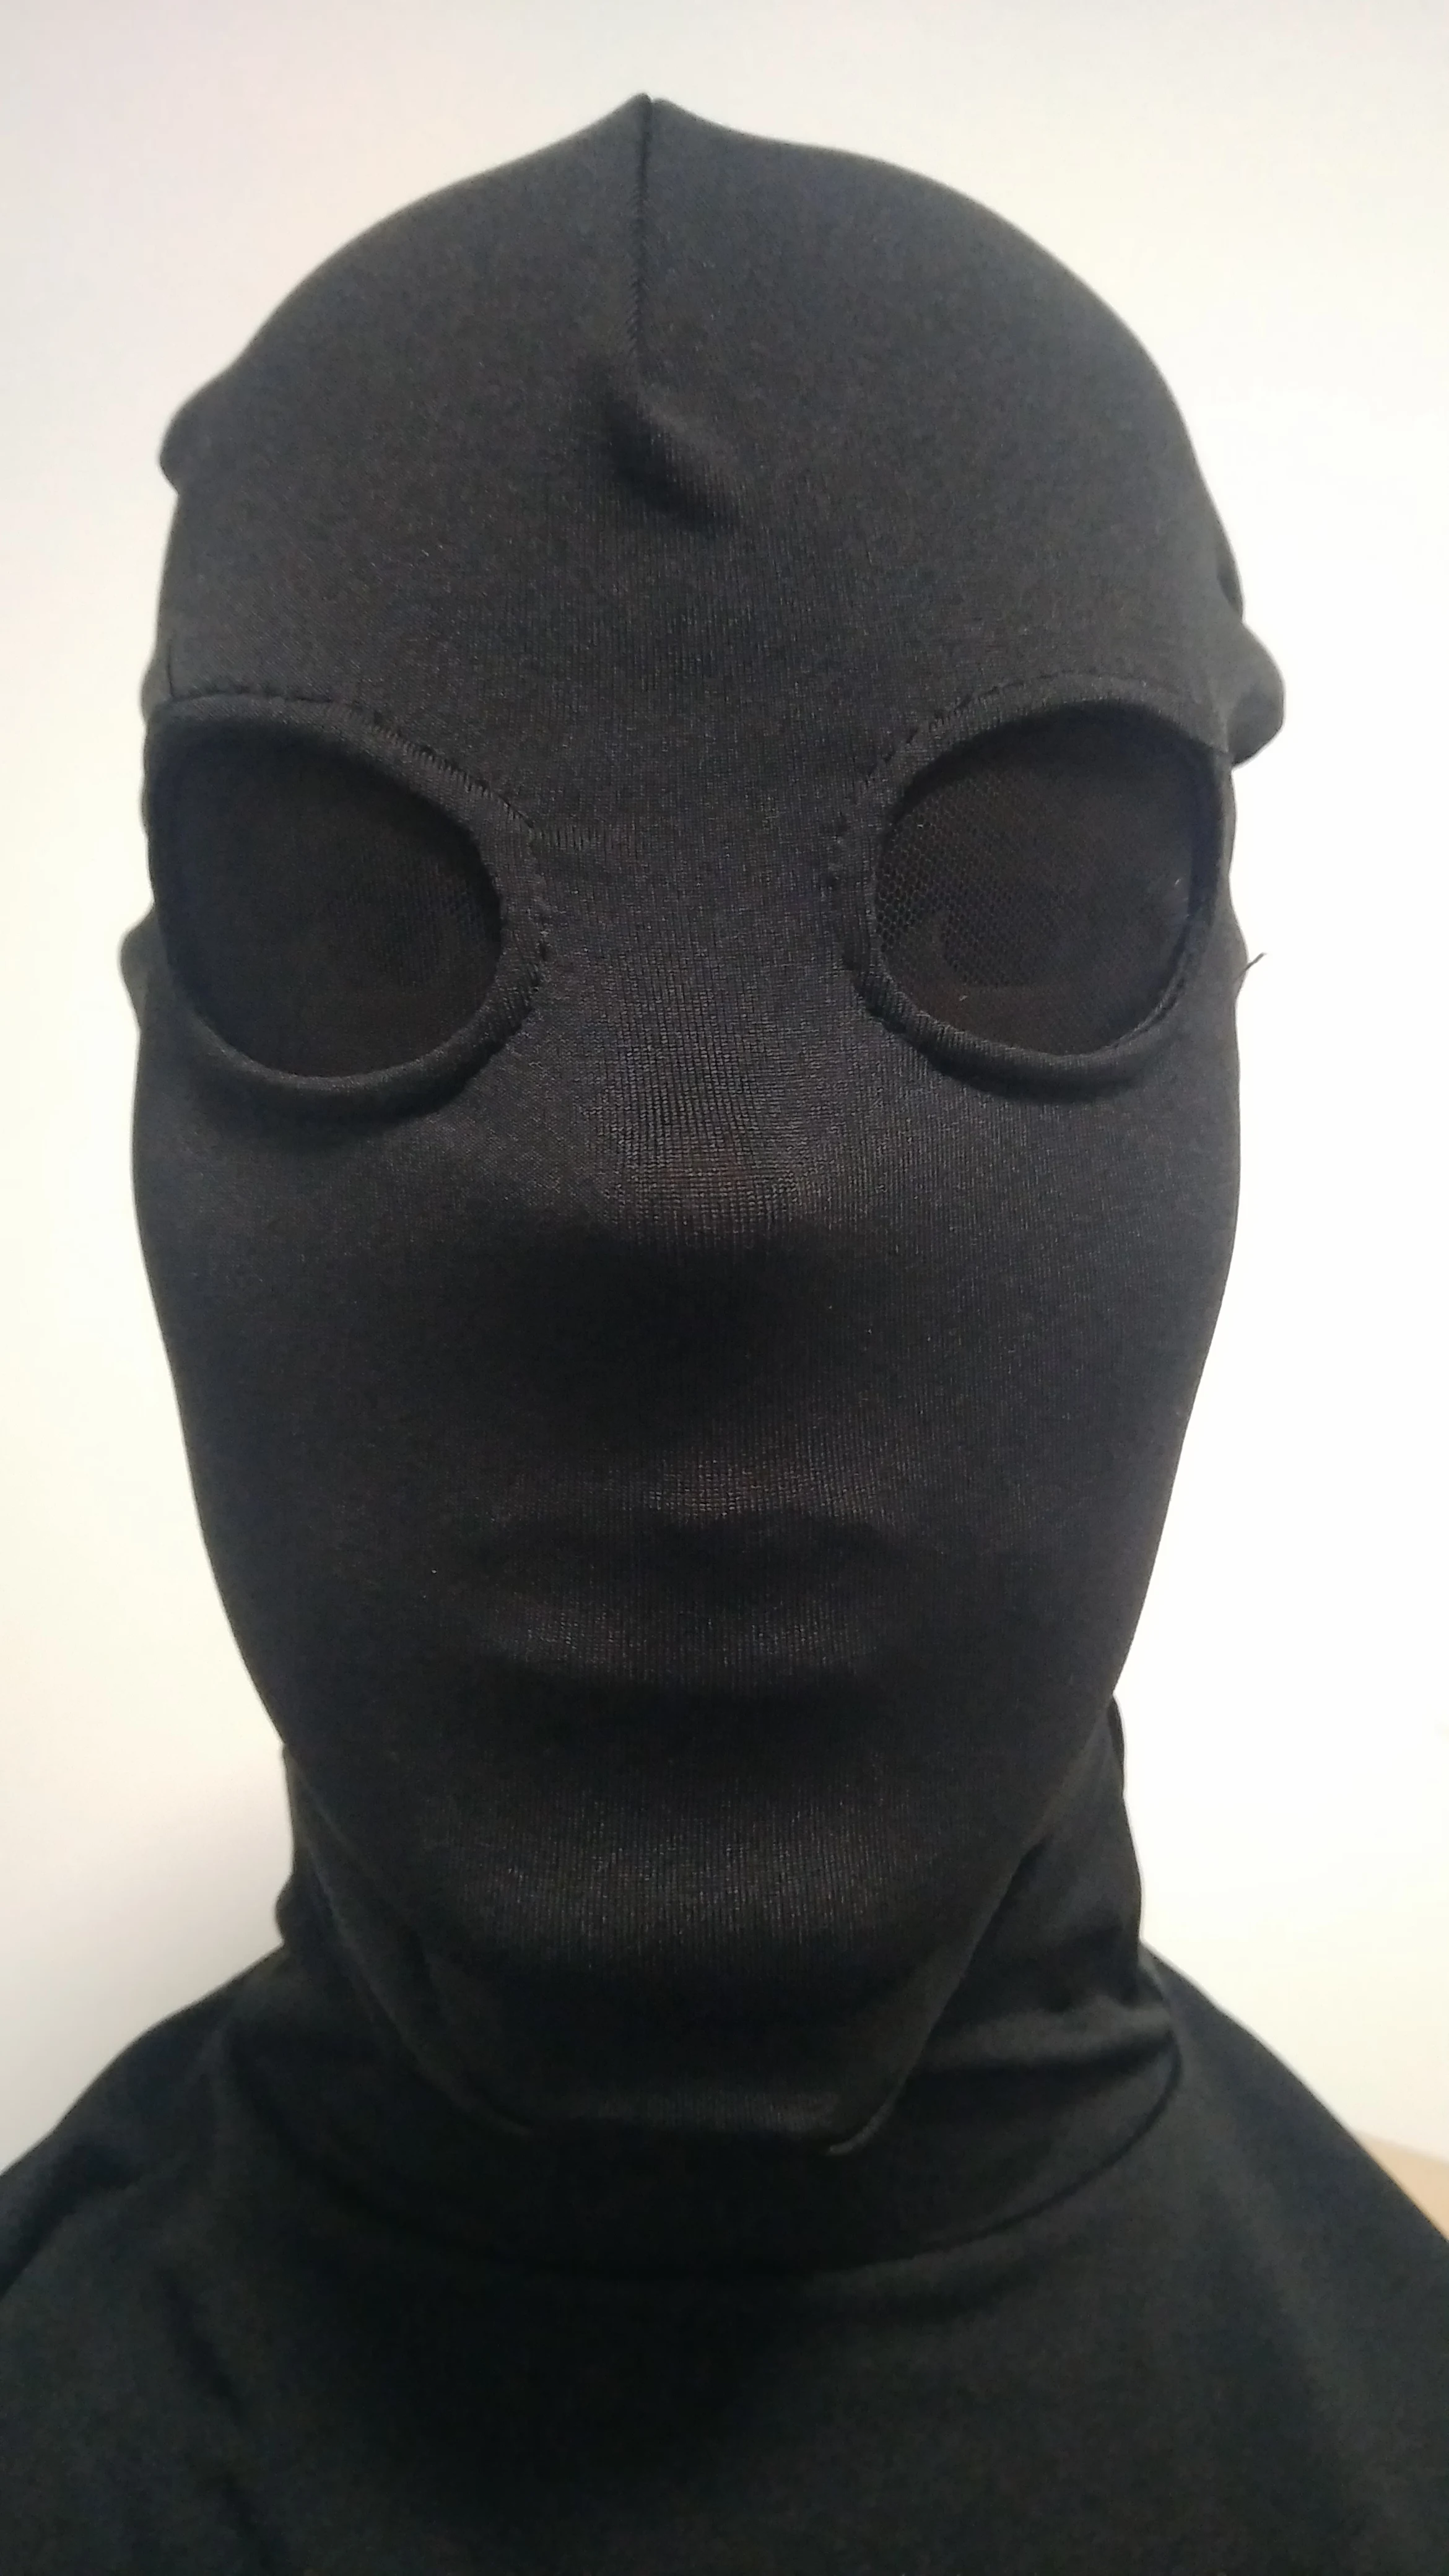 Black color Mask hood open mesh eyes Adult unisex Zentai Costumes Party Accessories Halloween Masks Cosplay